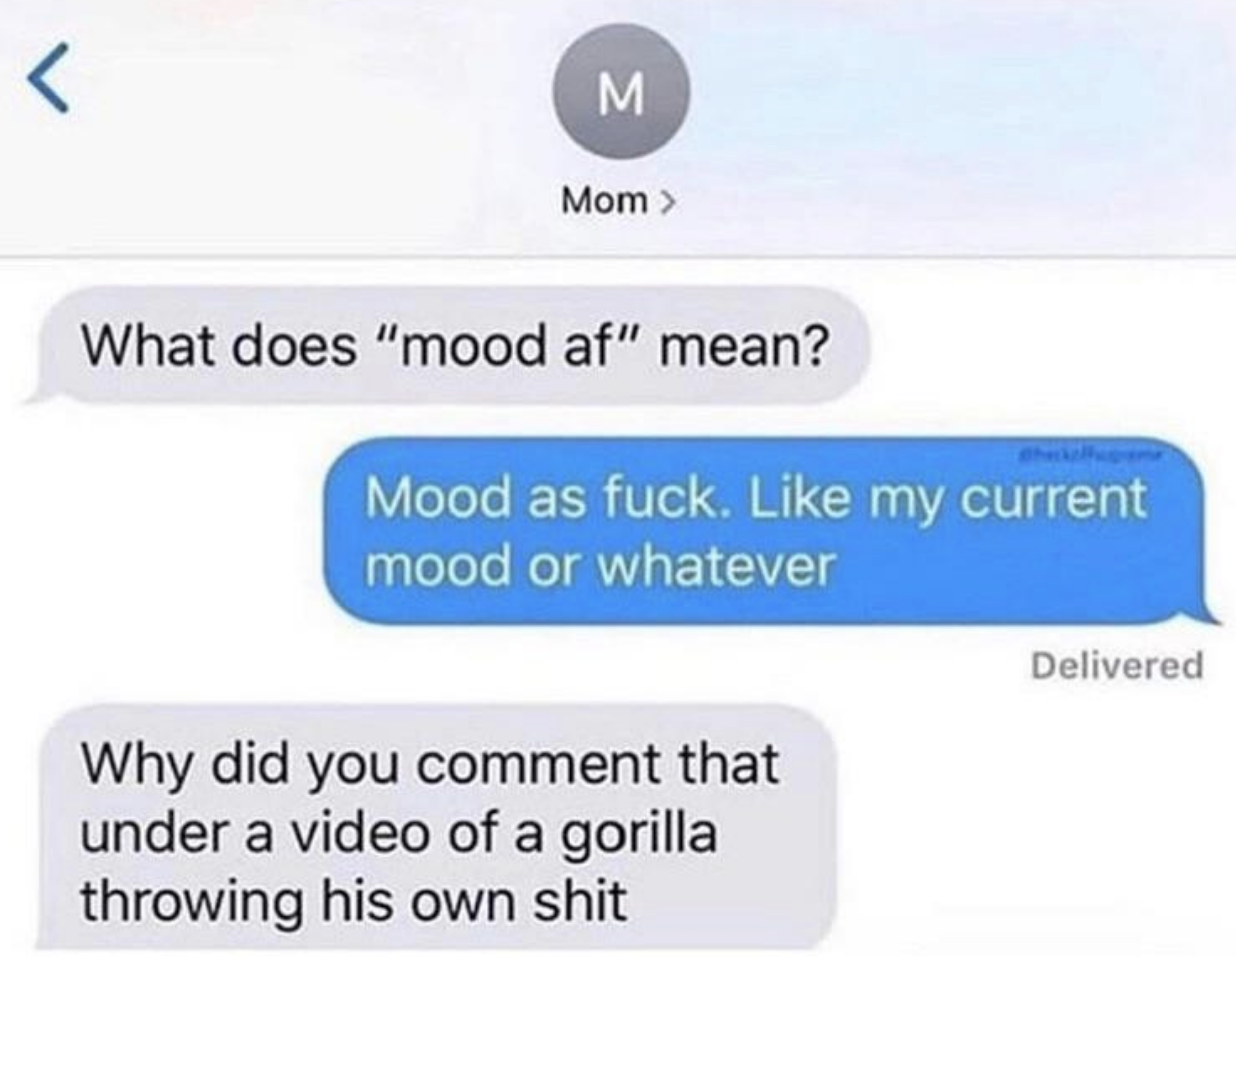 A parent asks what &quot;mood af&quot; means, the child says &quot;mood as fuck,&quot; and the parent asks &quot;why did you comment that under a video of a gorilla throwing his own shit?&quot;